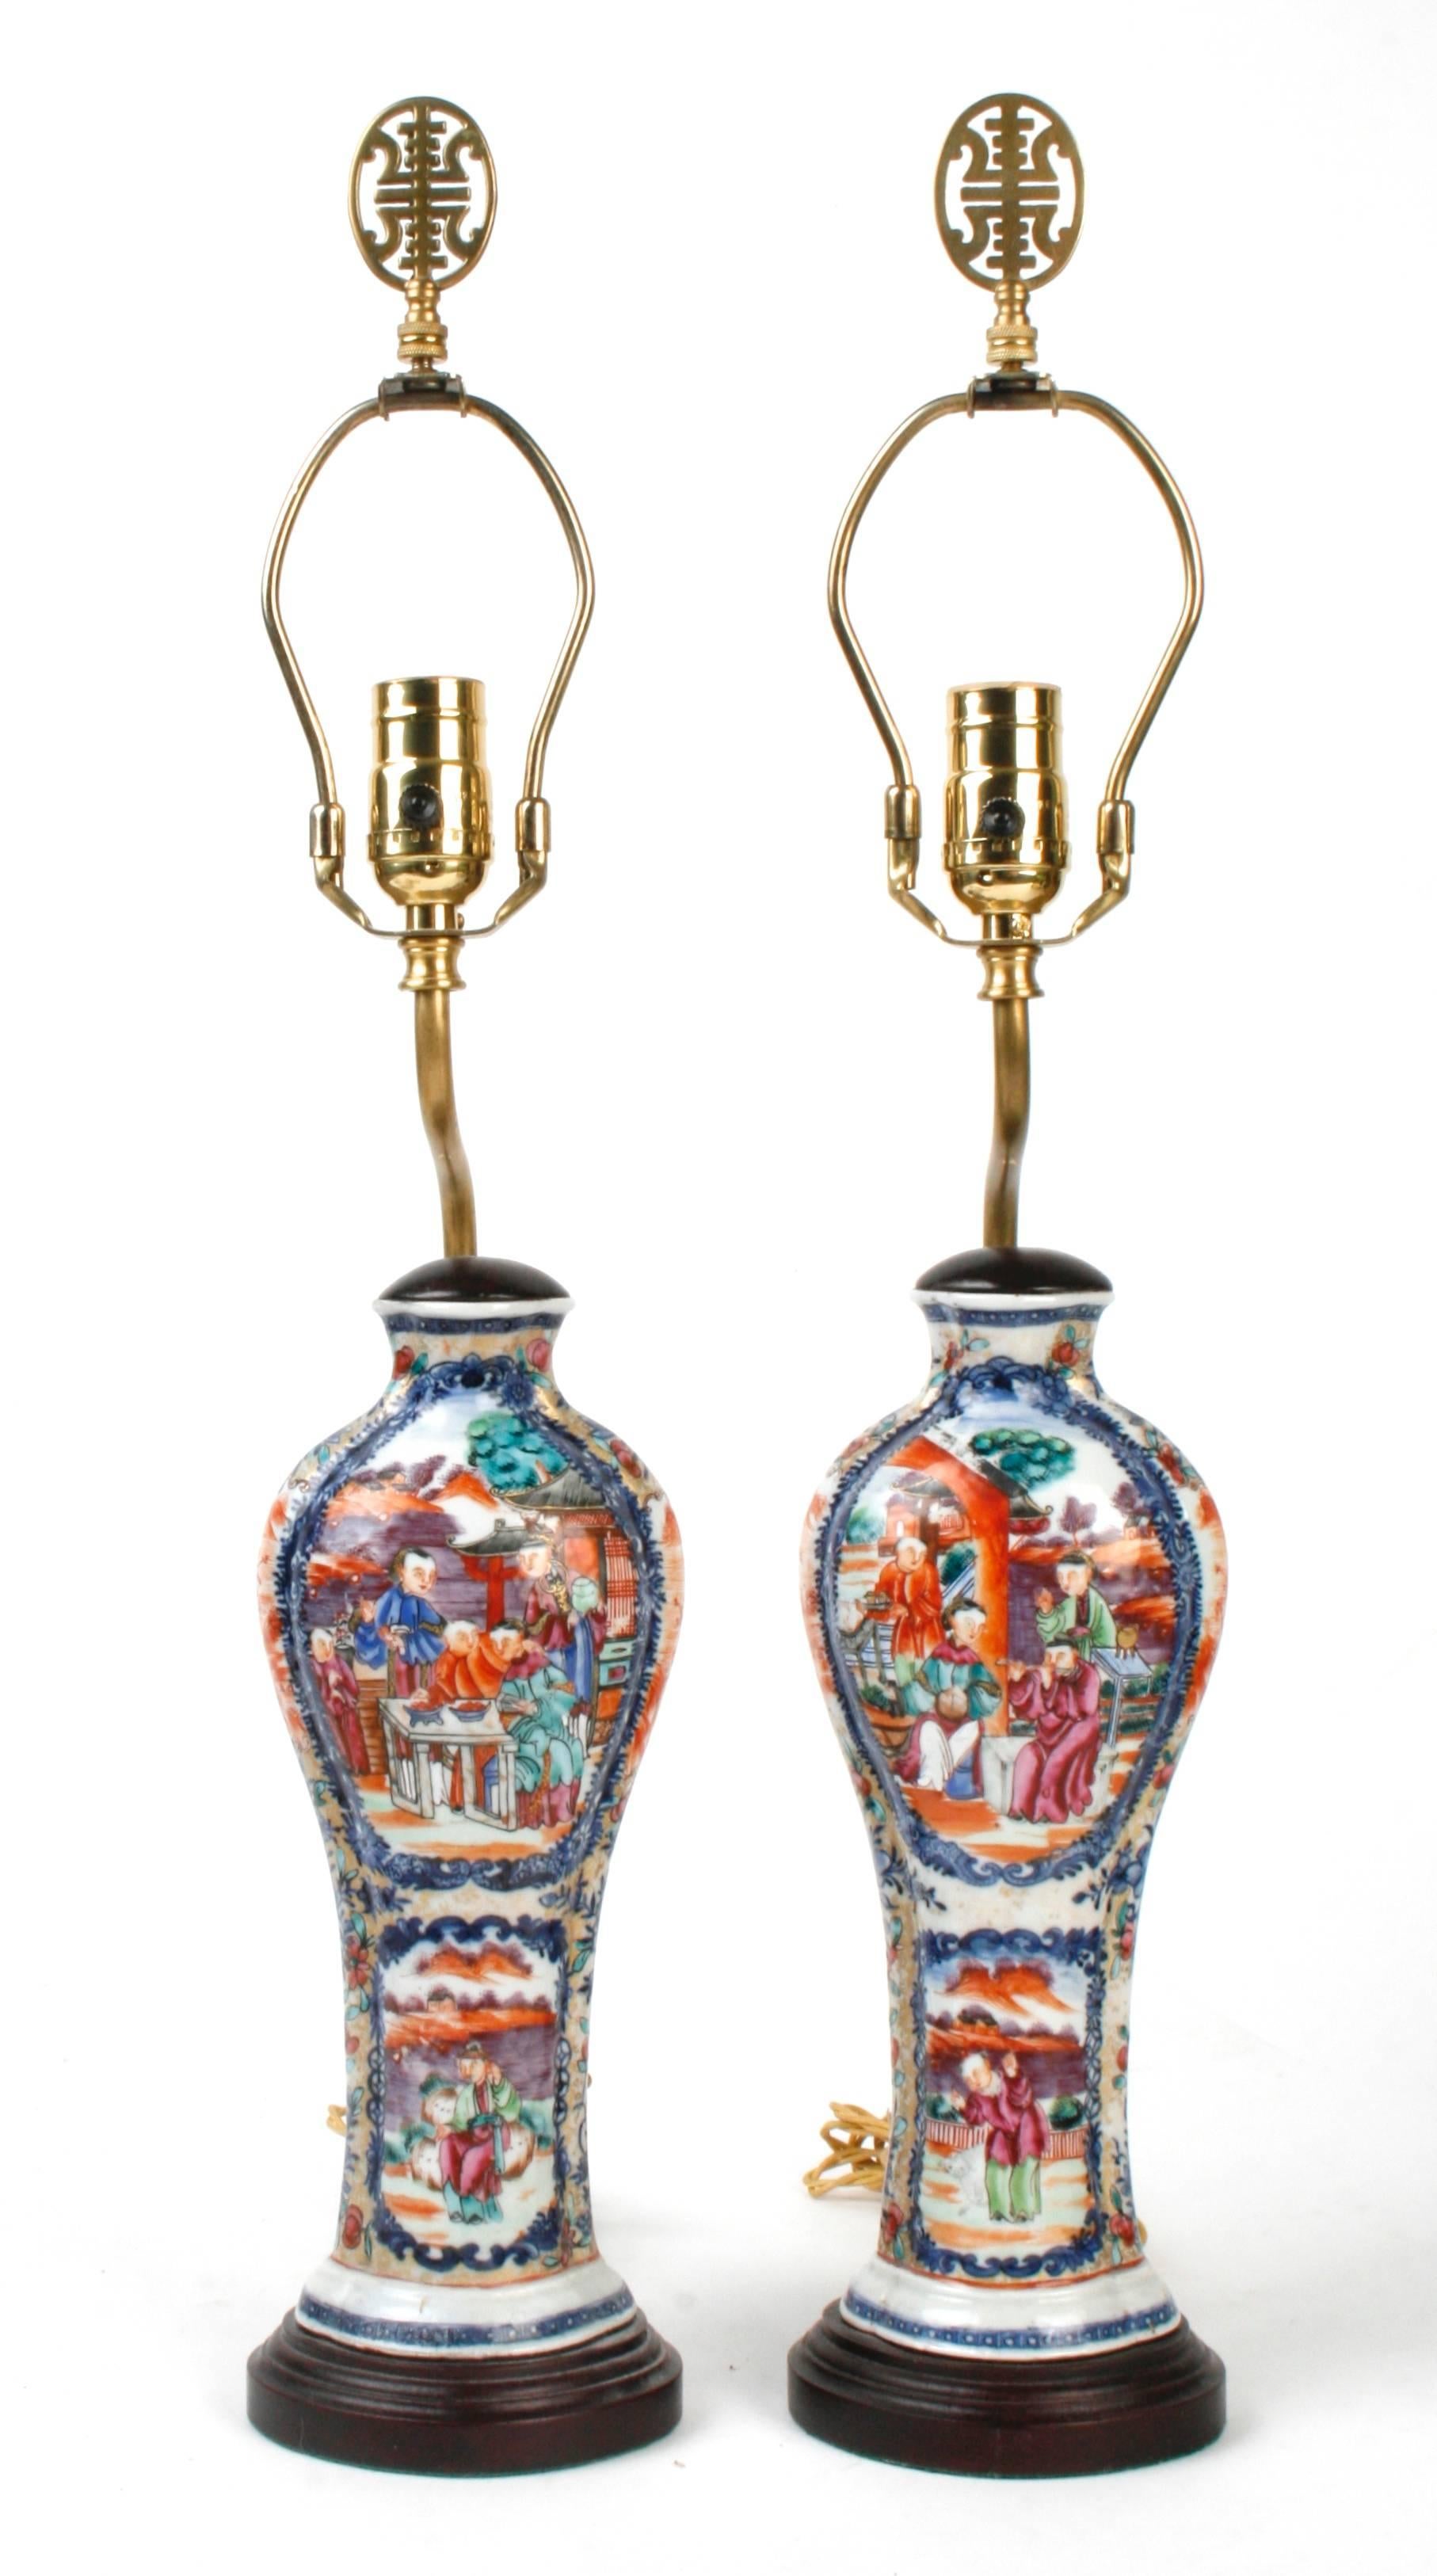 A pair of Rose Mandarin Chinese export vases now converted into lamps, c1800. The Chinese export vases are polychrome enameled in the Rose Mandarin pattern. Rose Mandarin is a variation on Rose Medallion, which shows only people in the panels. The